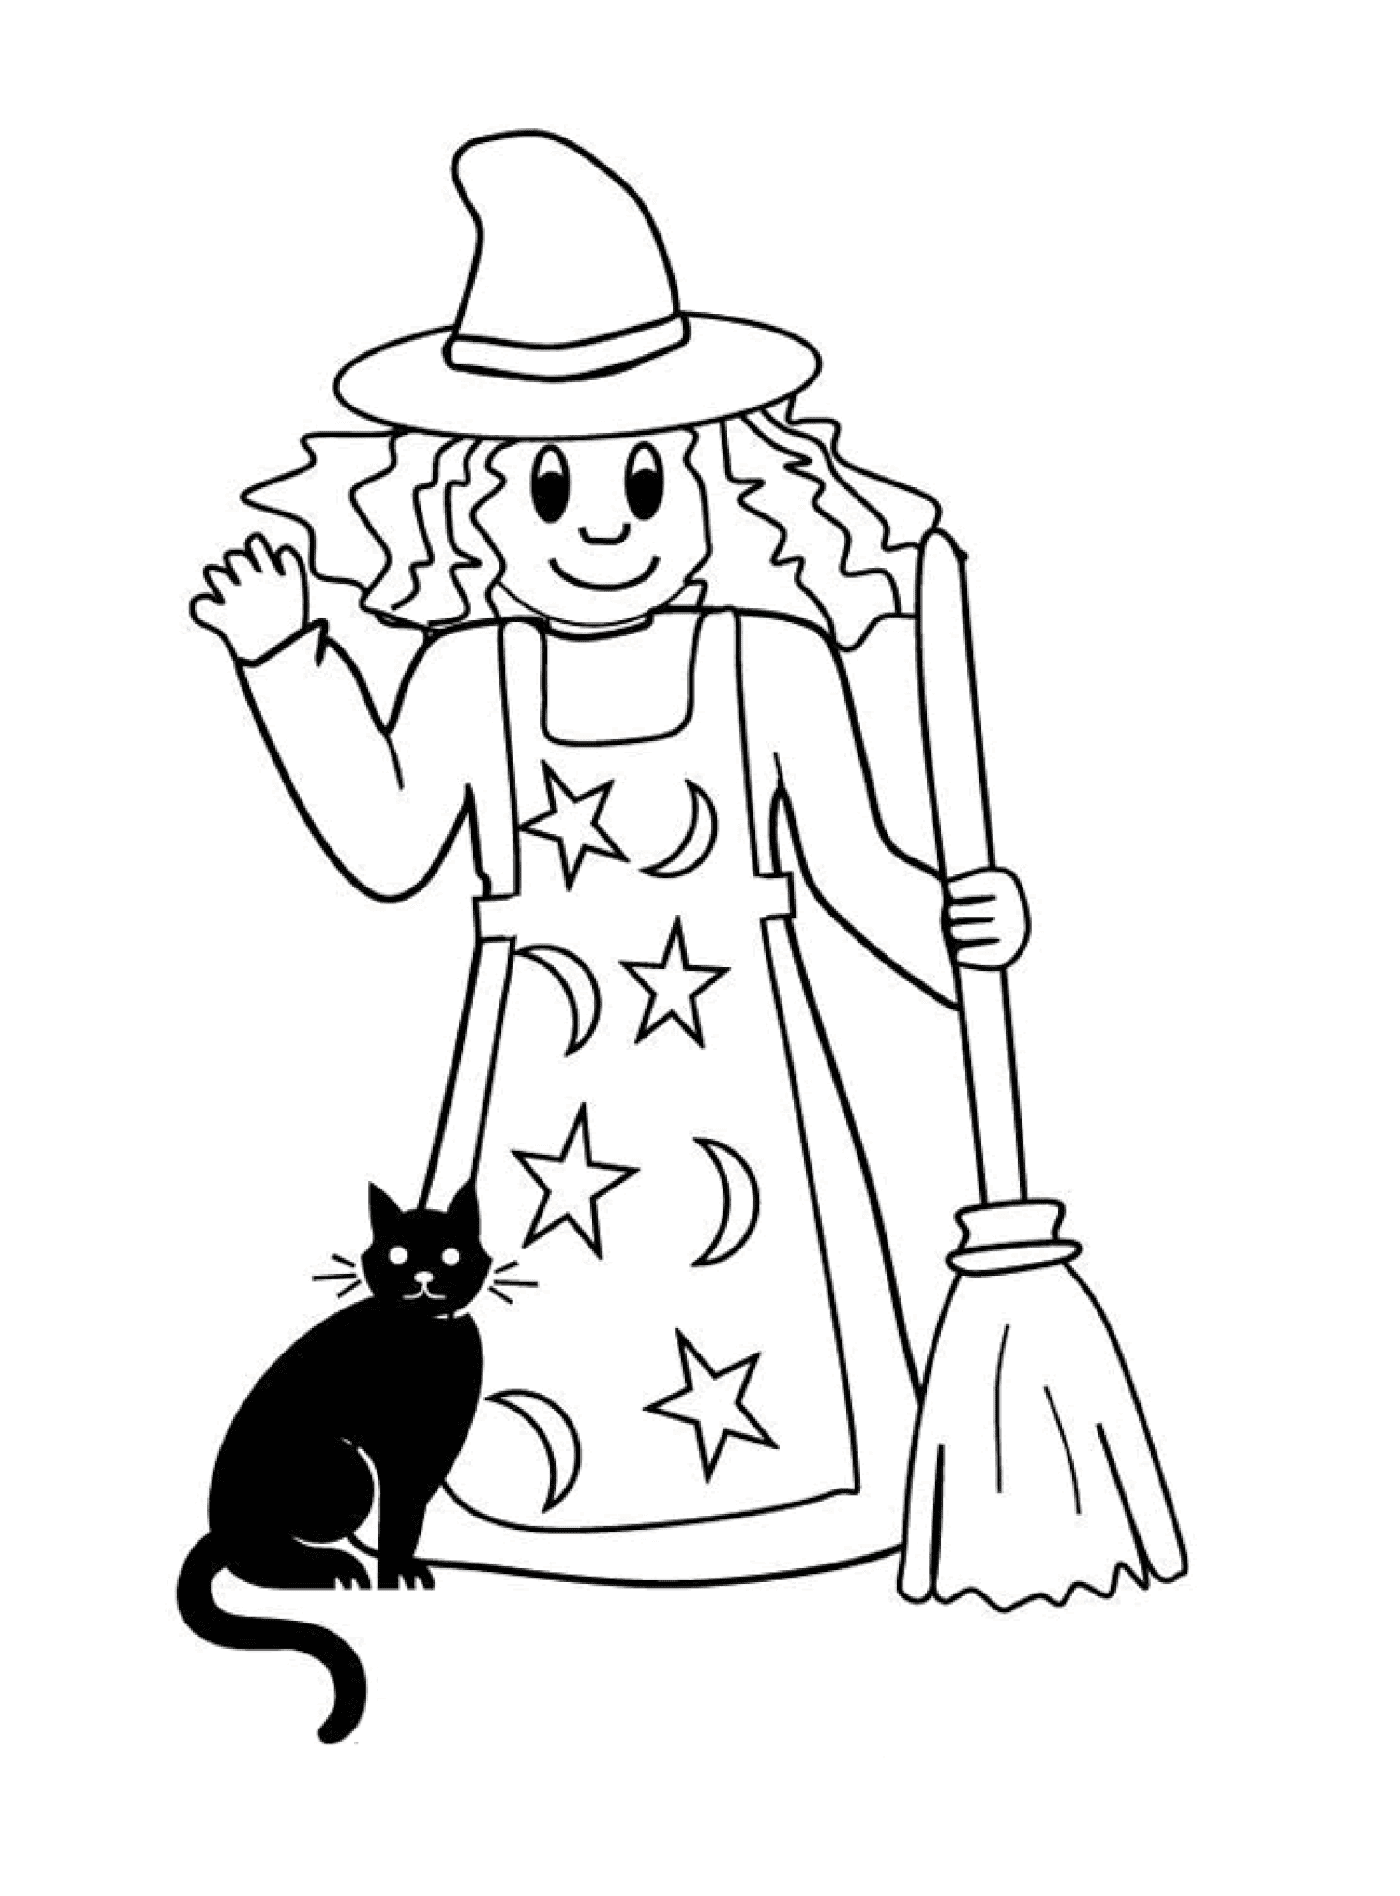  Simple witch accompanied by her black cat 